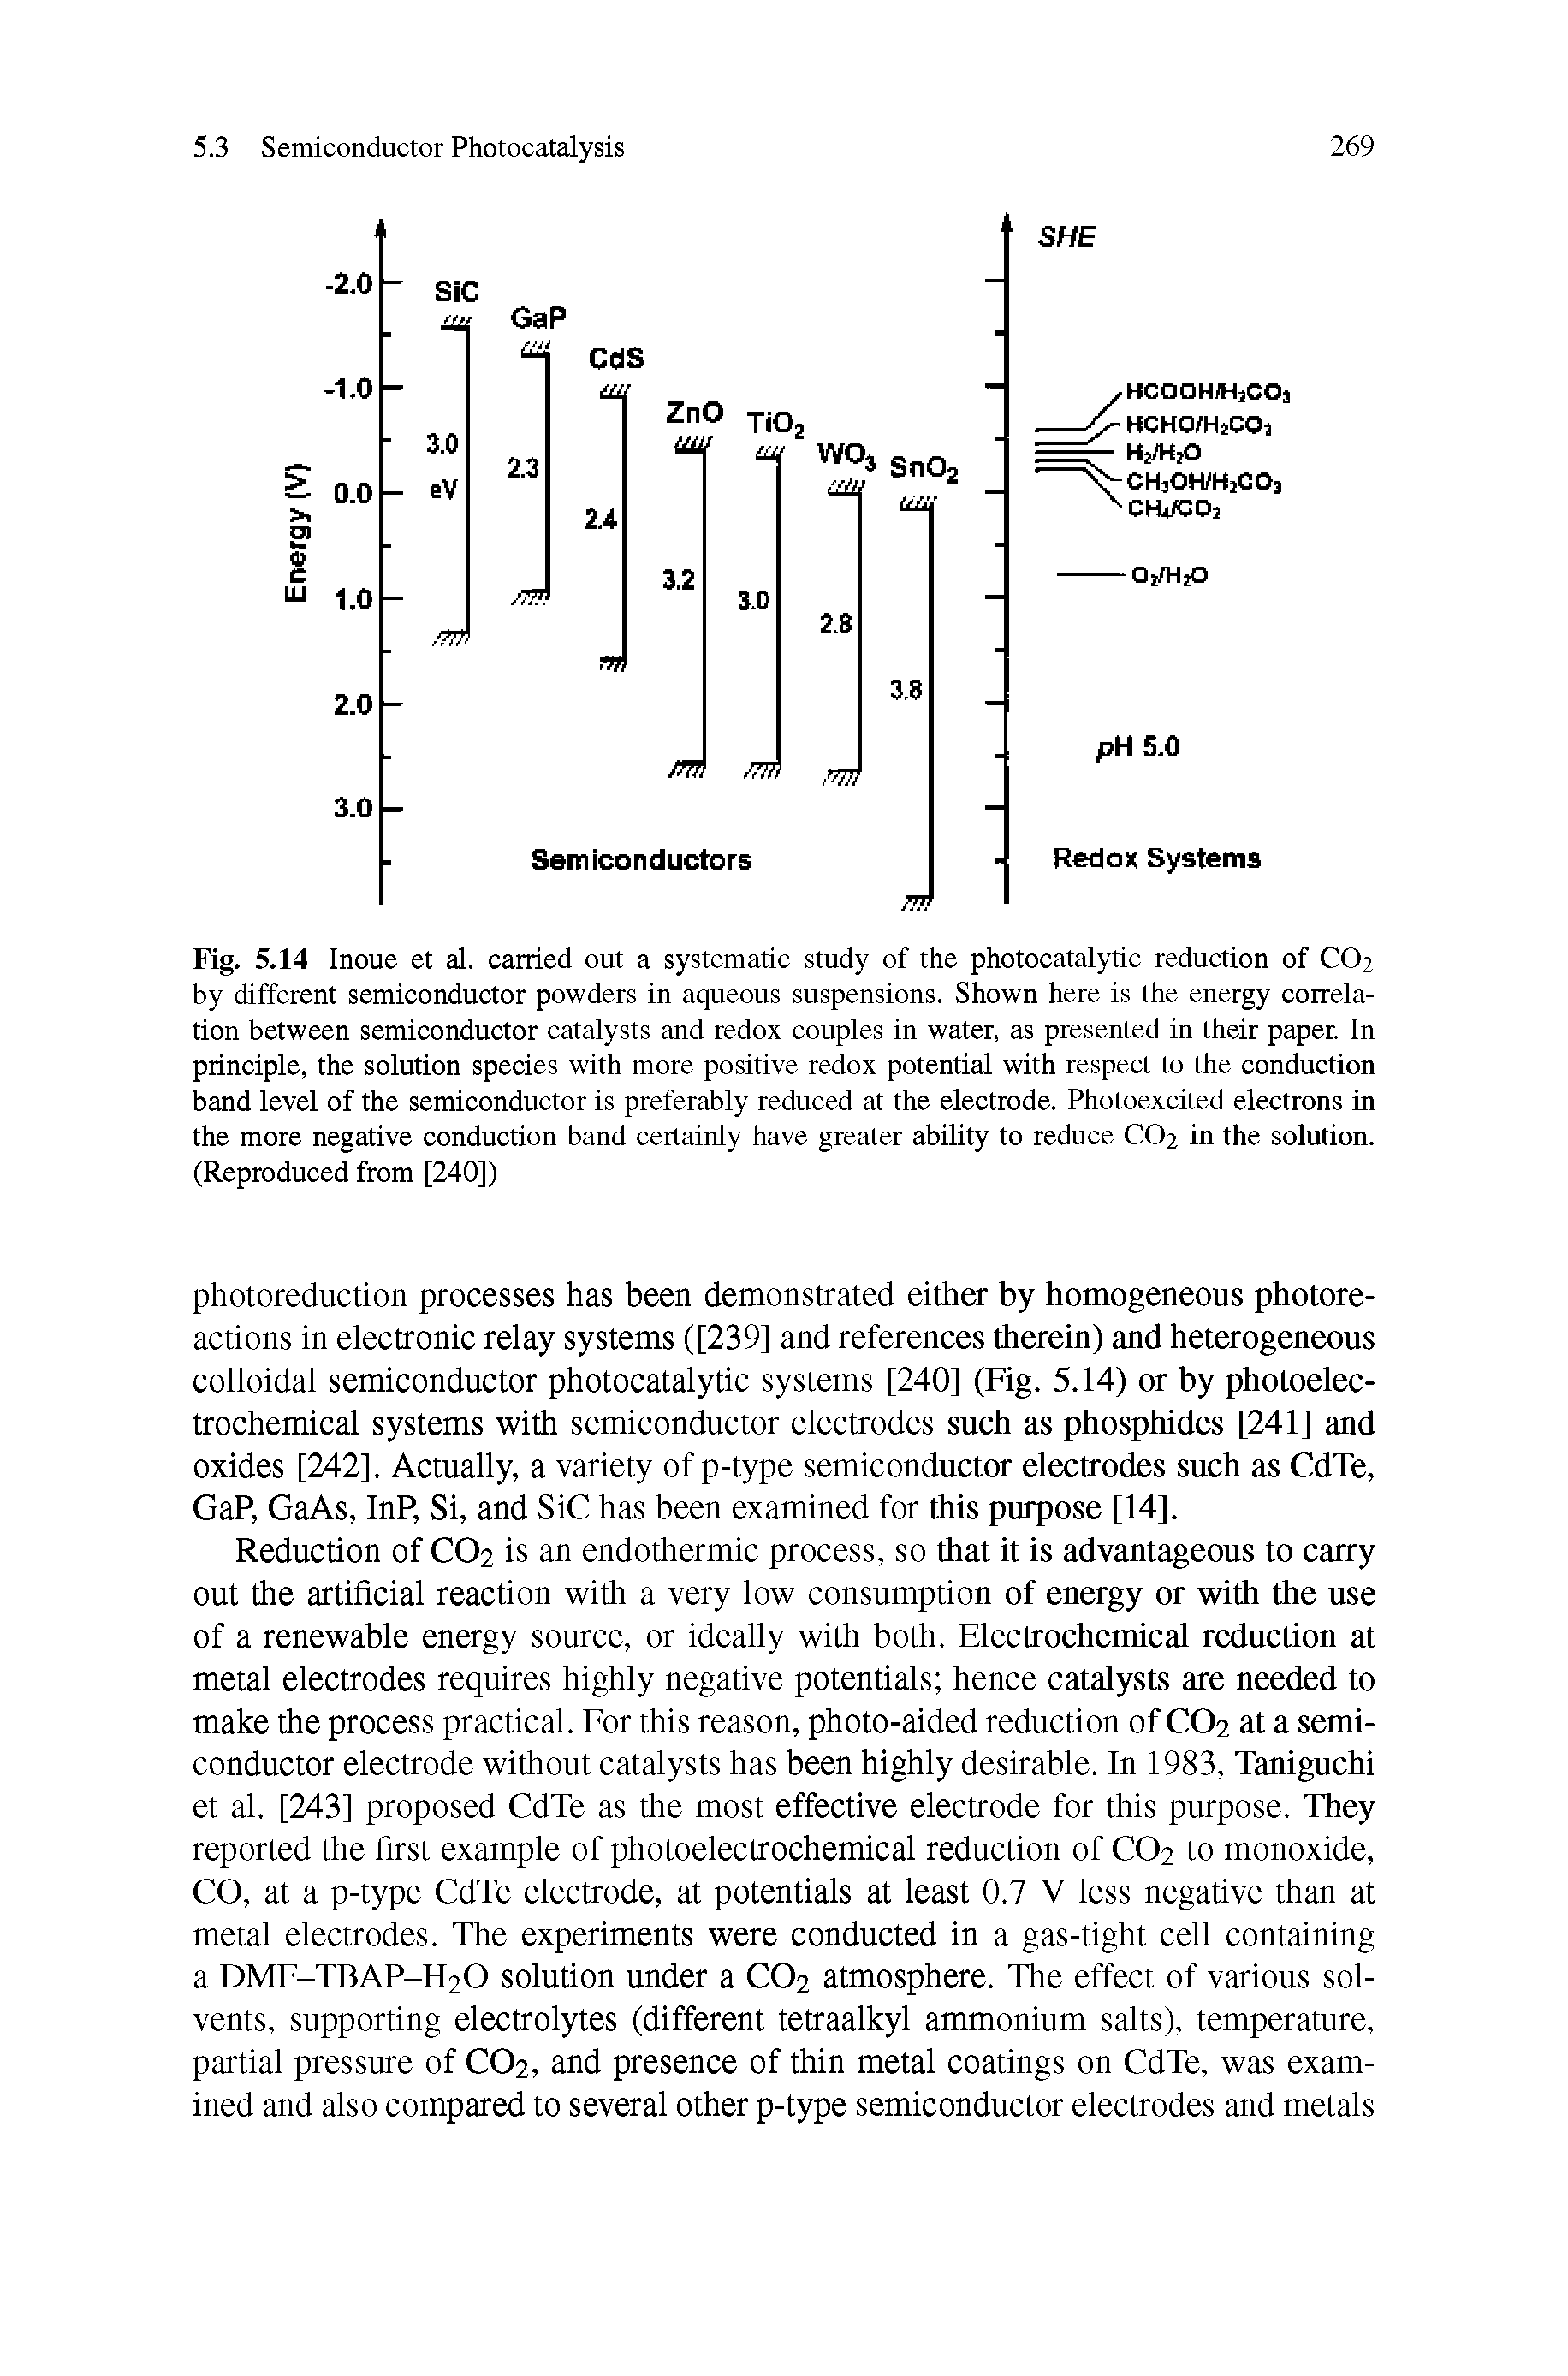 Fig. 5.14 Inoue et al. carried out a systematic study of the photocatalytic reduction of CO2 by different semiconductor powders in aqueous suspensions. Shown here is the energy correlation between semiconductor catalysts and redox couples in water, as presented in their paper. In principle, the solution species with more positive redox potential with respect to the conduction band level of the semiconductor is preferably reduced at the electrode. Photoexcited electrons in the more negative conduction band certainly have greater ability to reduce CO2 in the solution. (Reproduced from [240])...